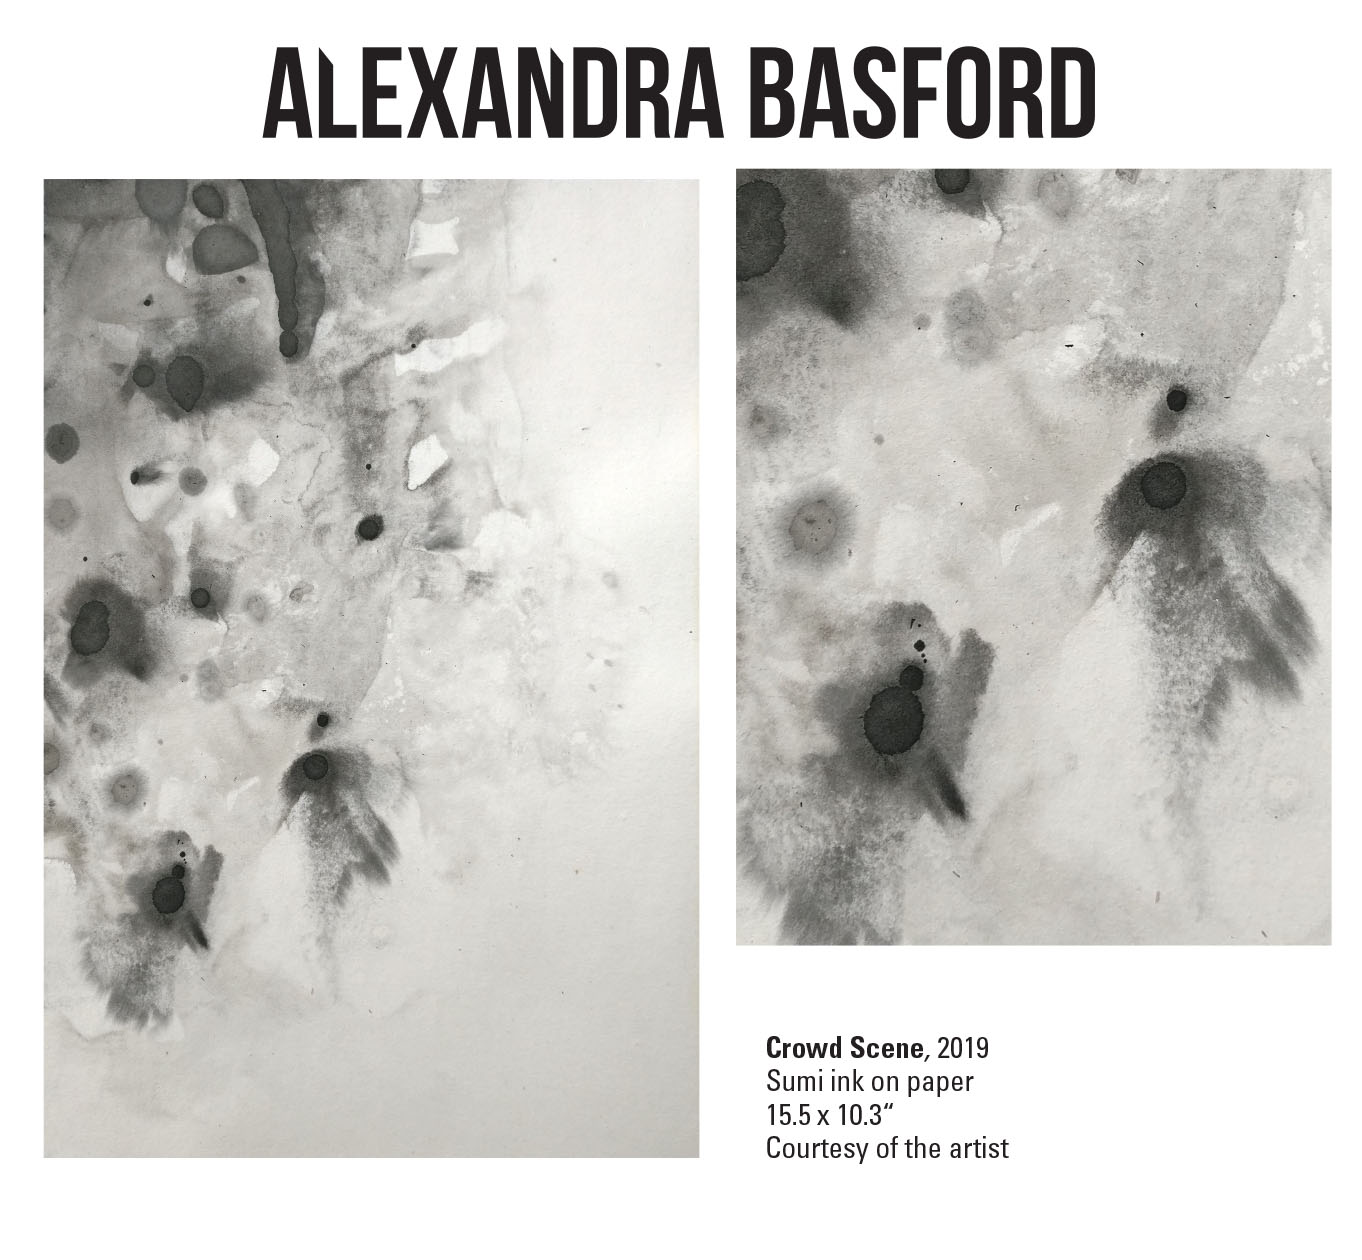 Alexandra Basford, Crowd Scene, 2019. Sumi ink on paper. 15.5 x 10.3" Courtesy of the artist. Abstract shapes in light and dark shades of black